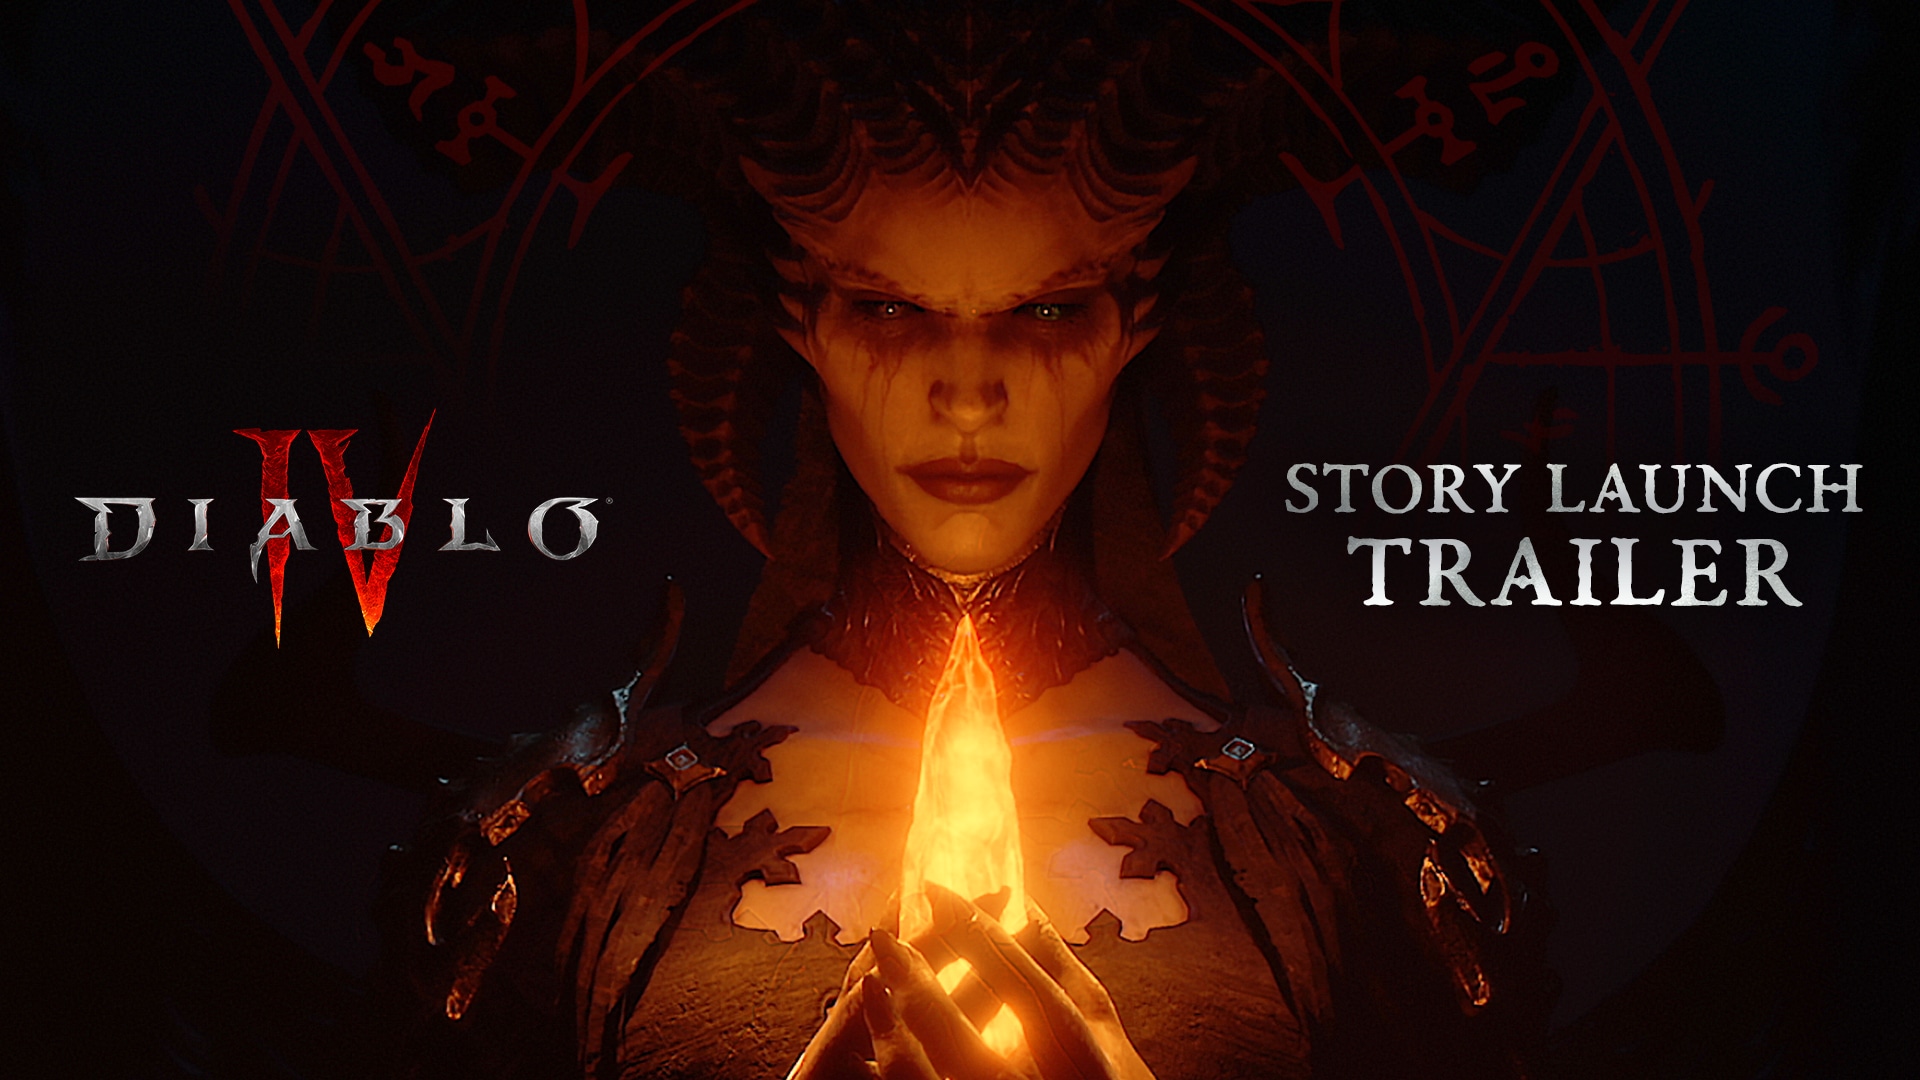 Watch the latest story trailer and witness the beginning of a new saga